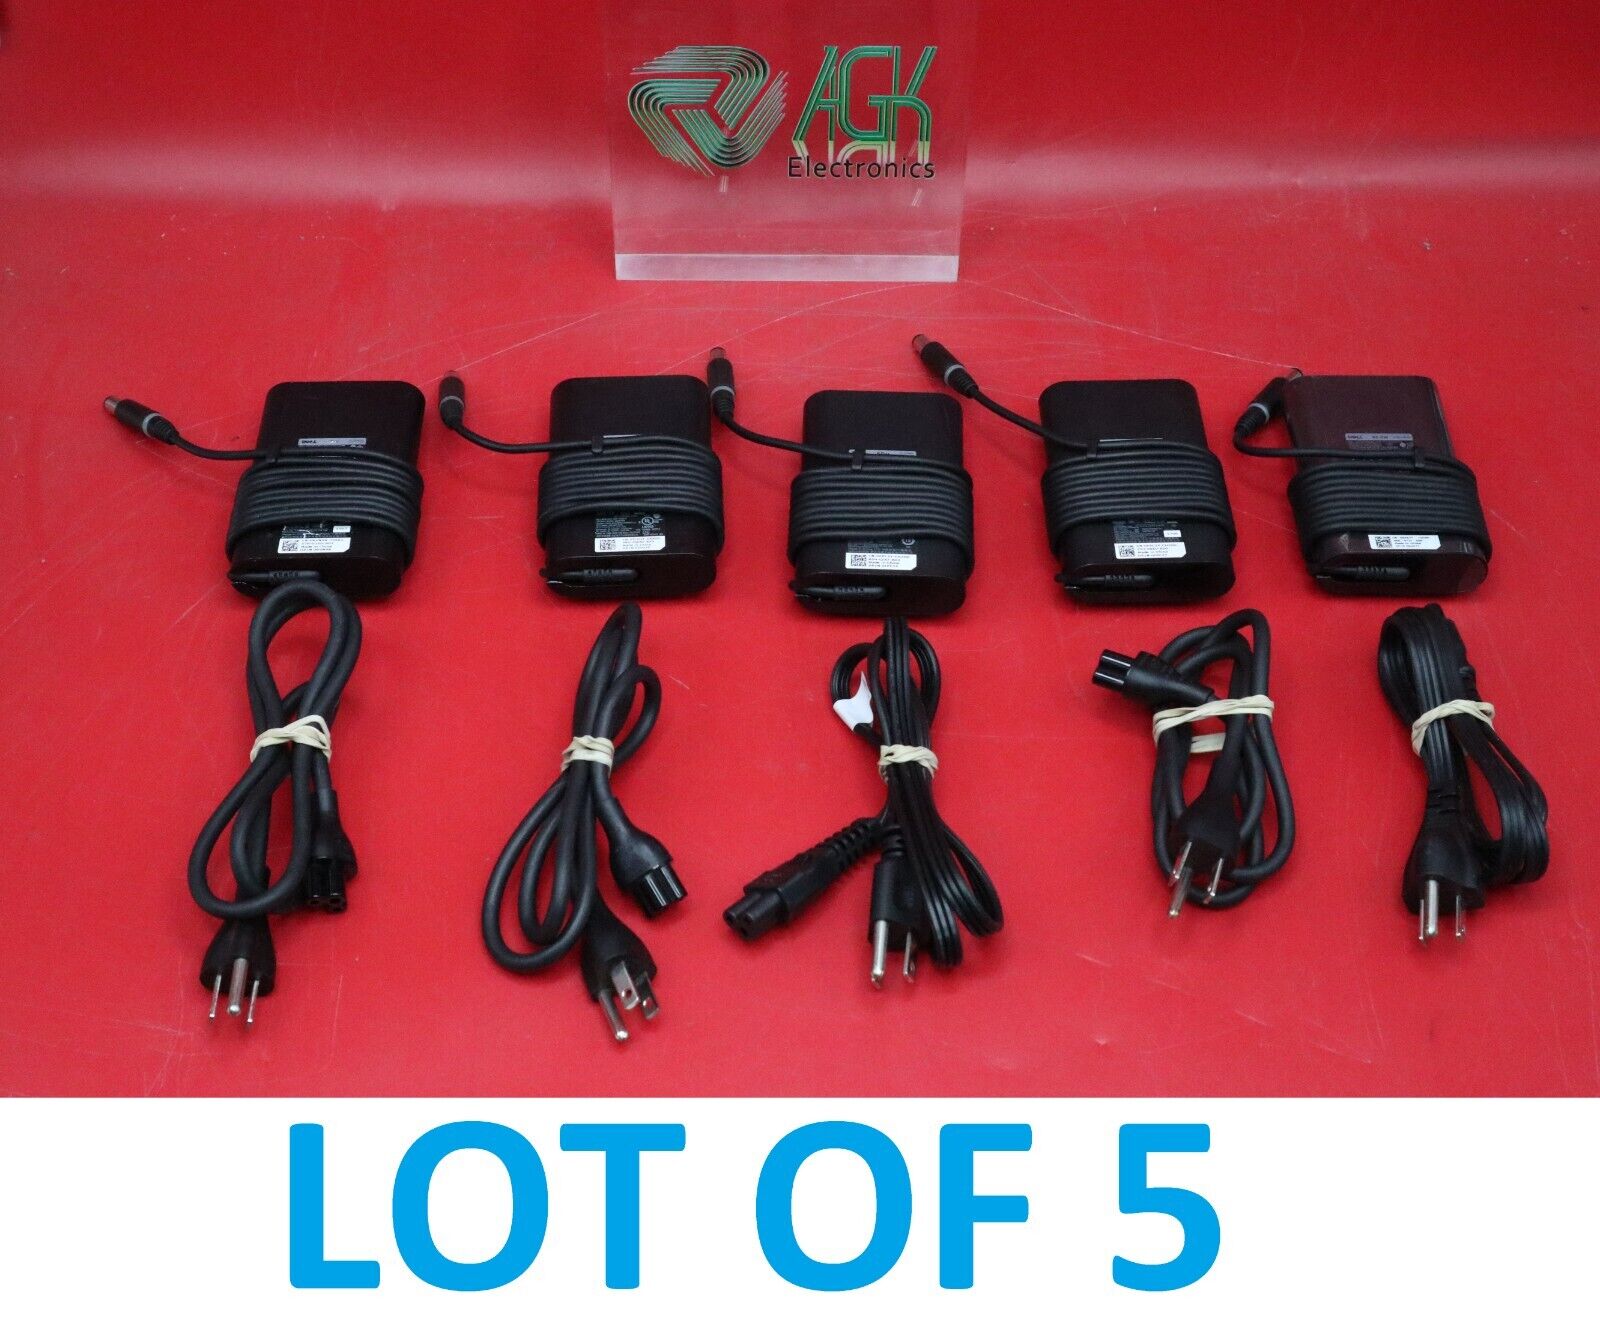 LOT of 5 OEM Dell Latitude 65W AC Charger Adapter G4X7T FPC2Y NVV12 JNKWD 5HJ2F